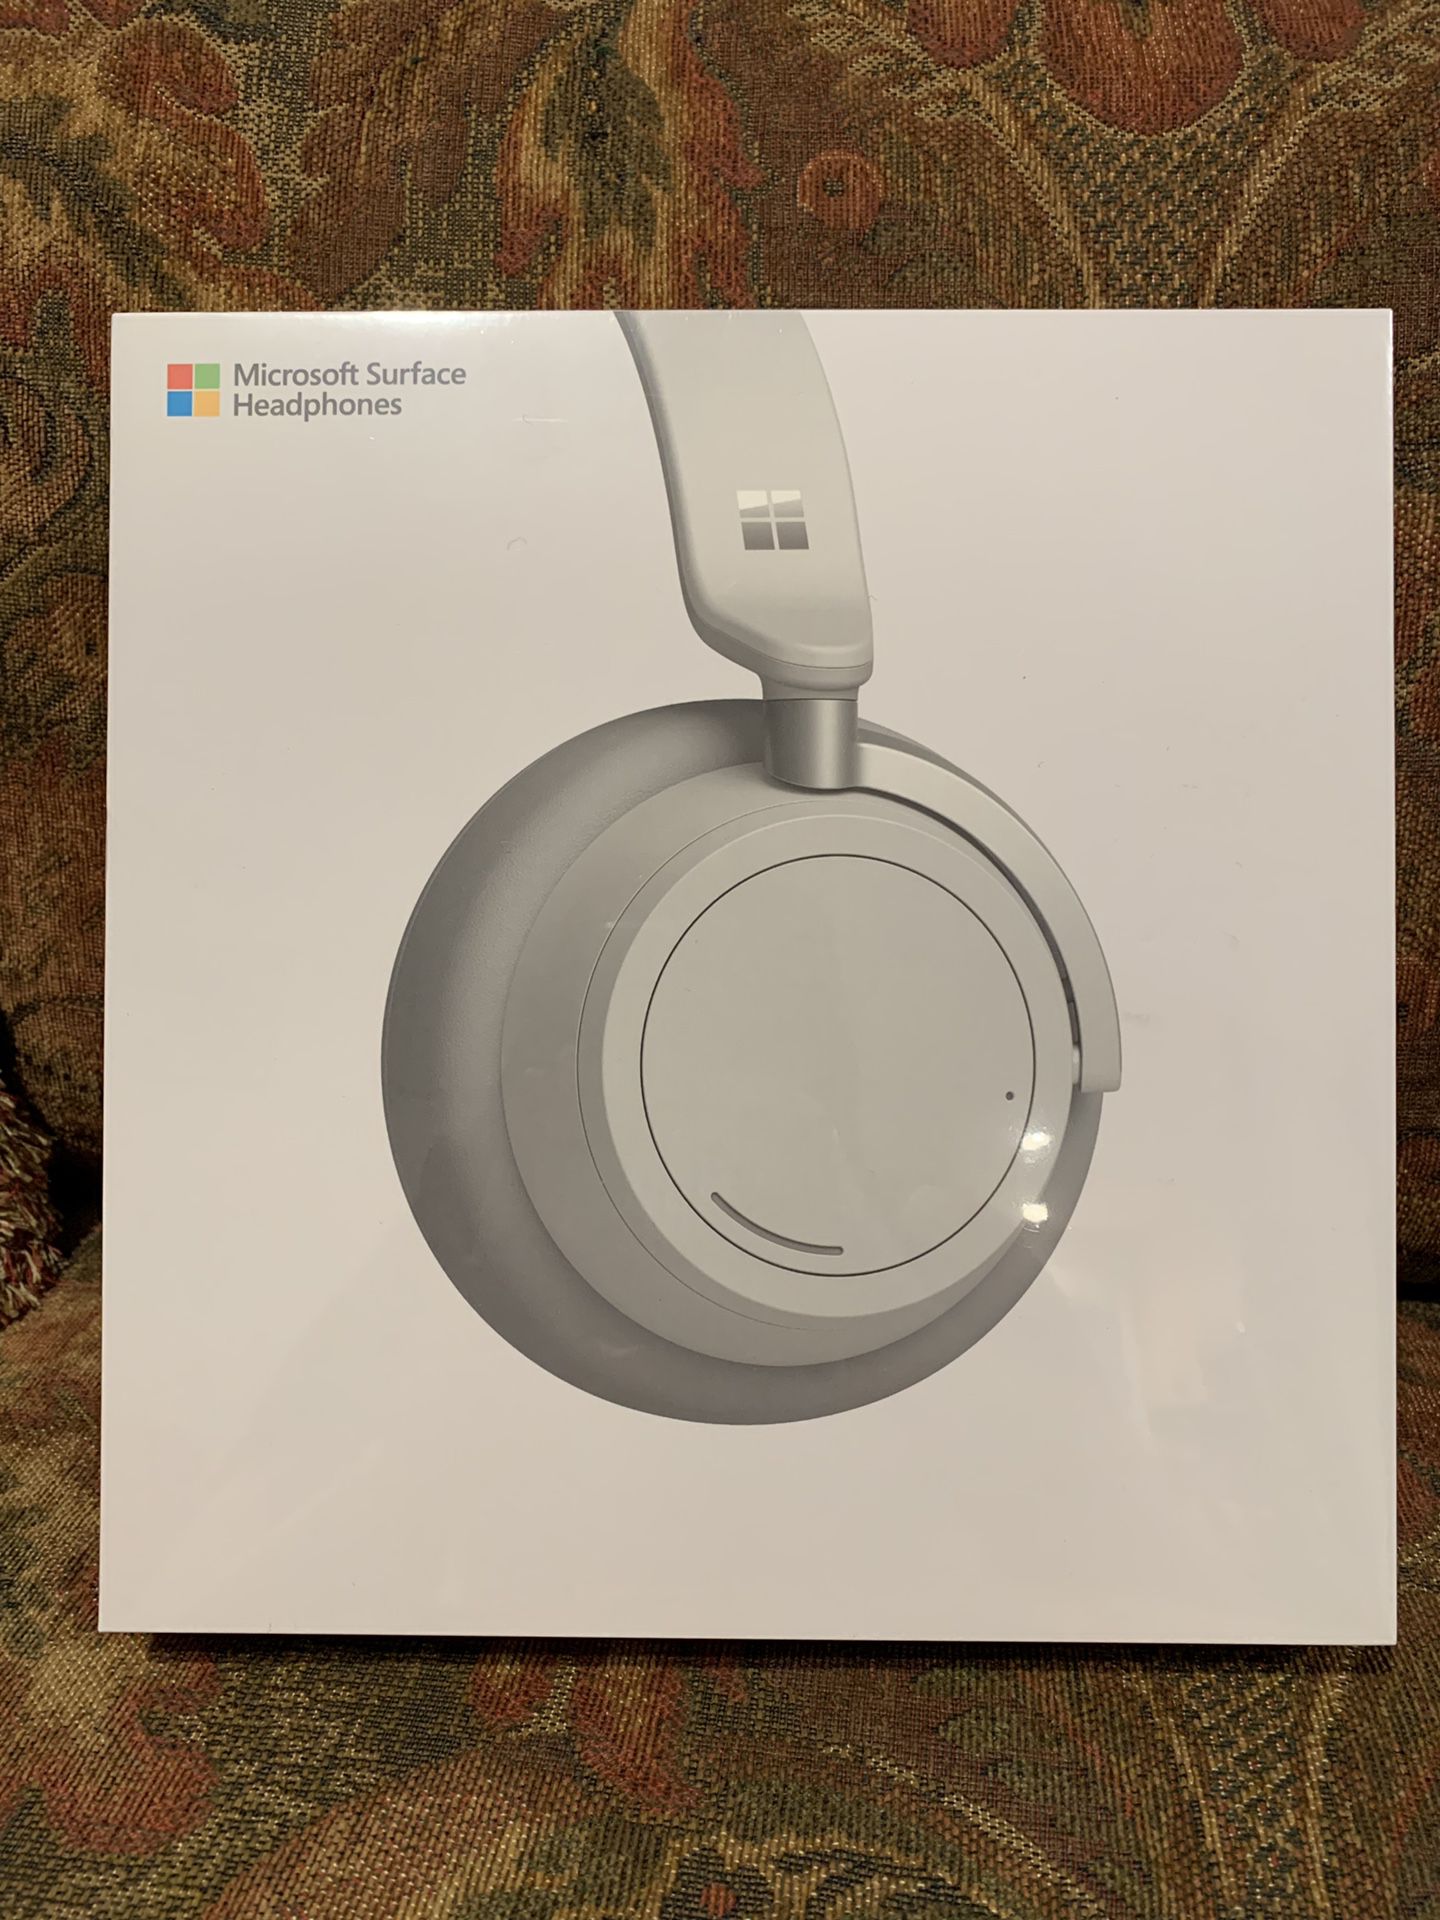 Microsoft surface headphones. Brand new. In package